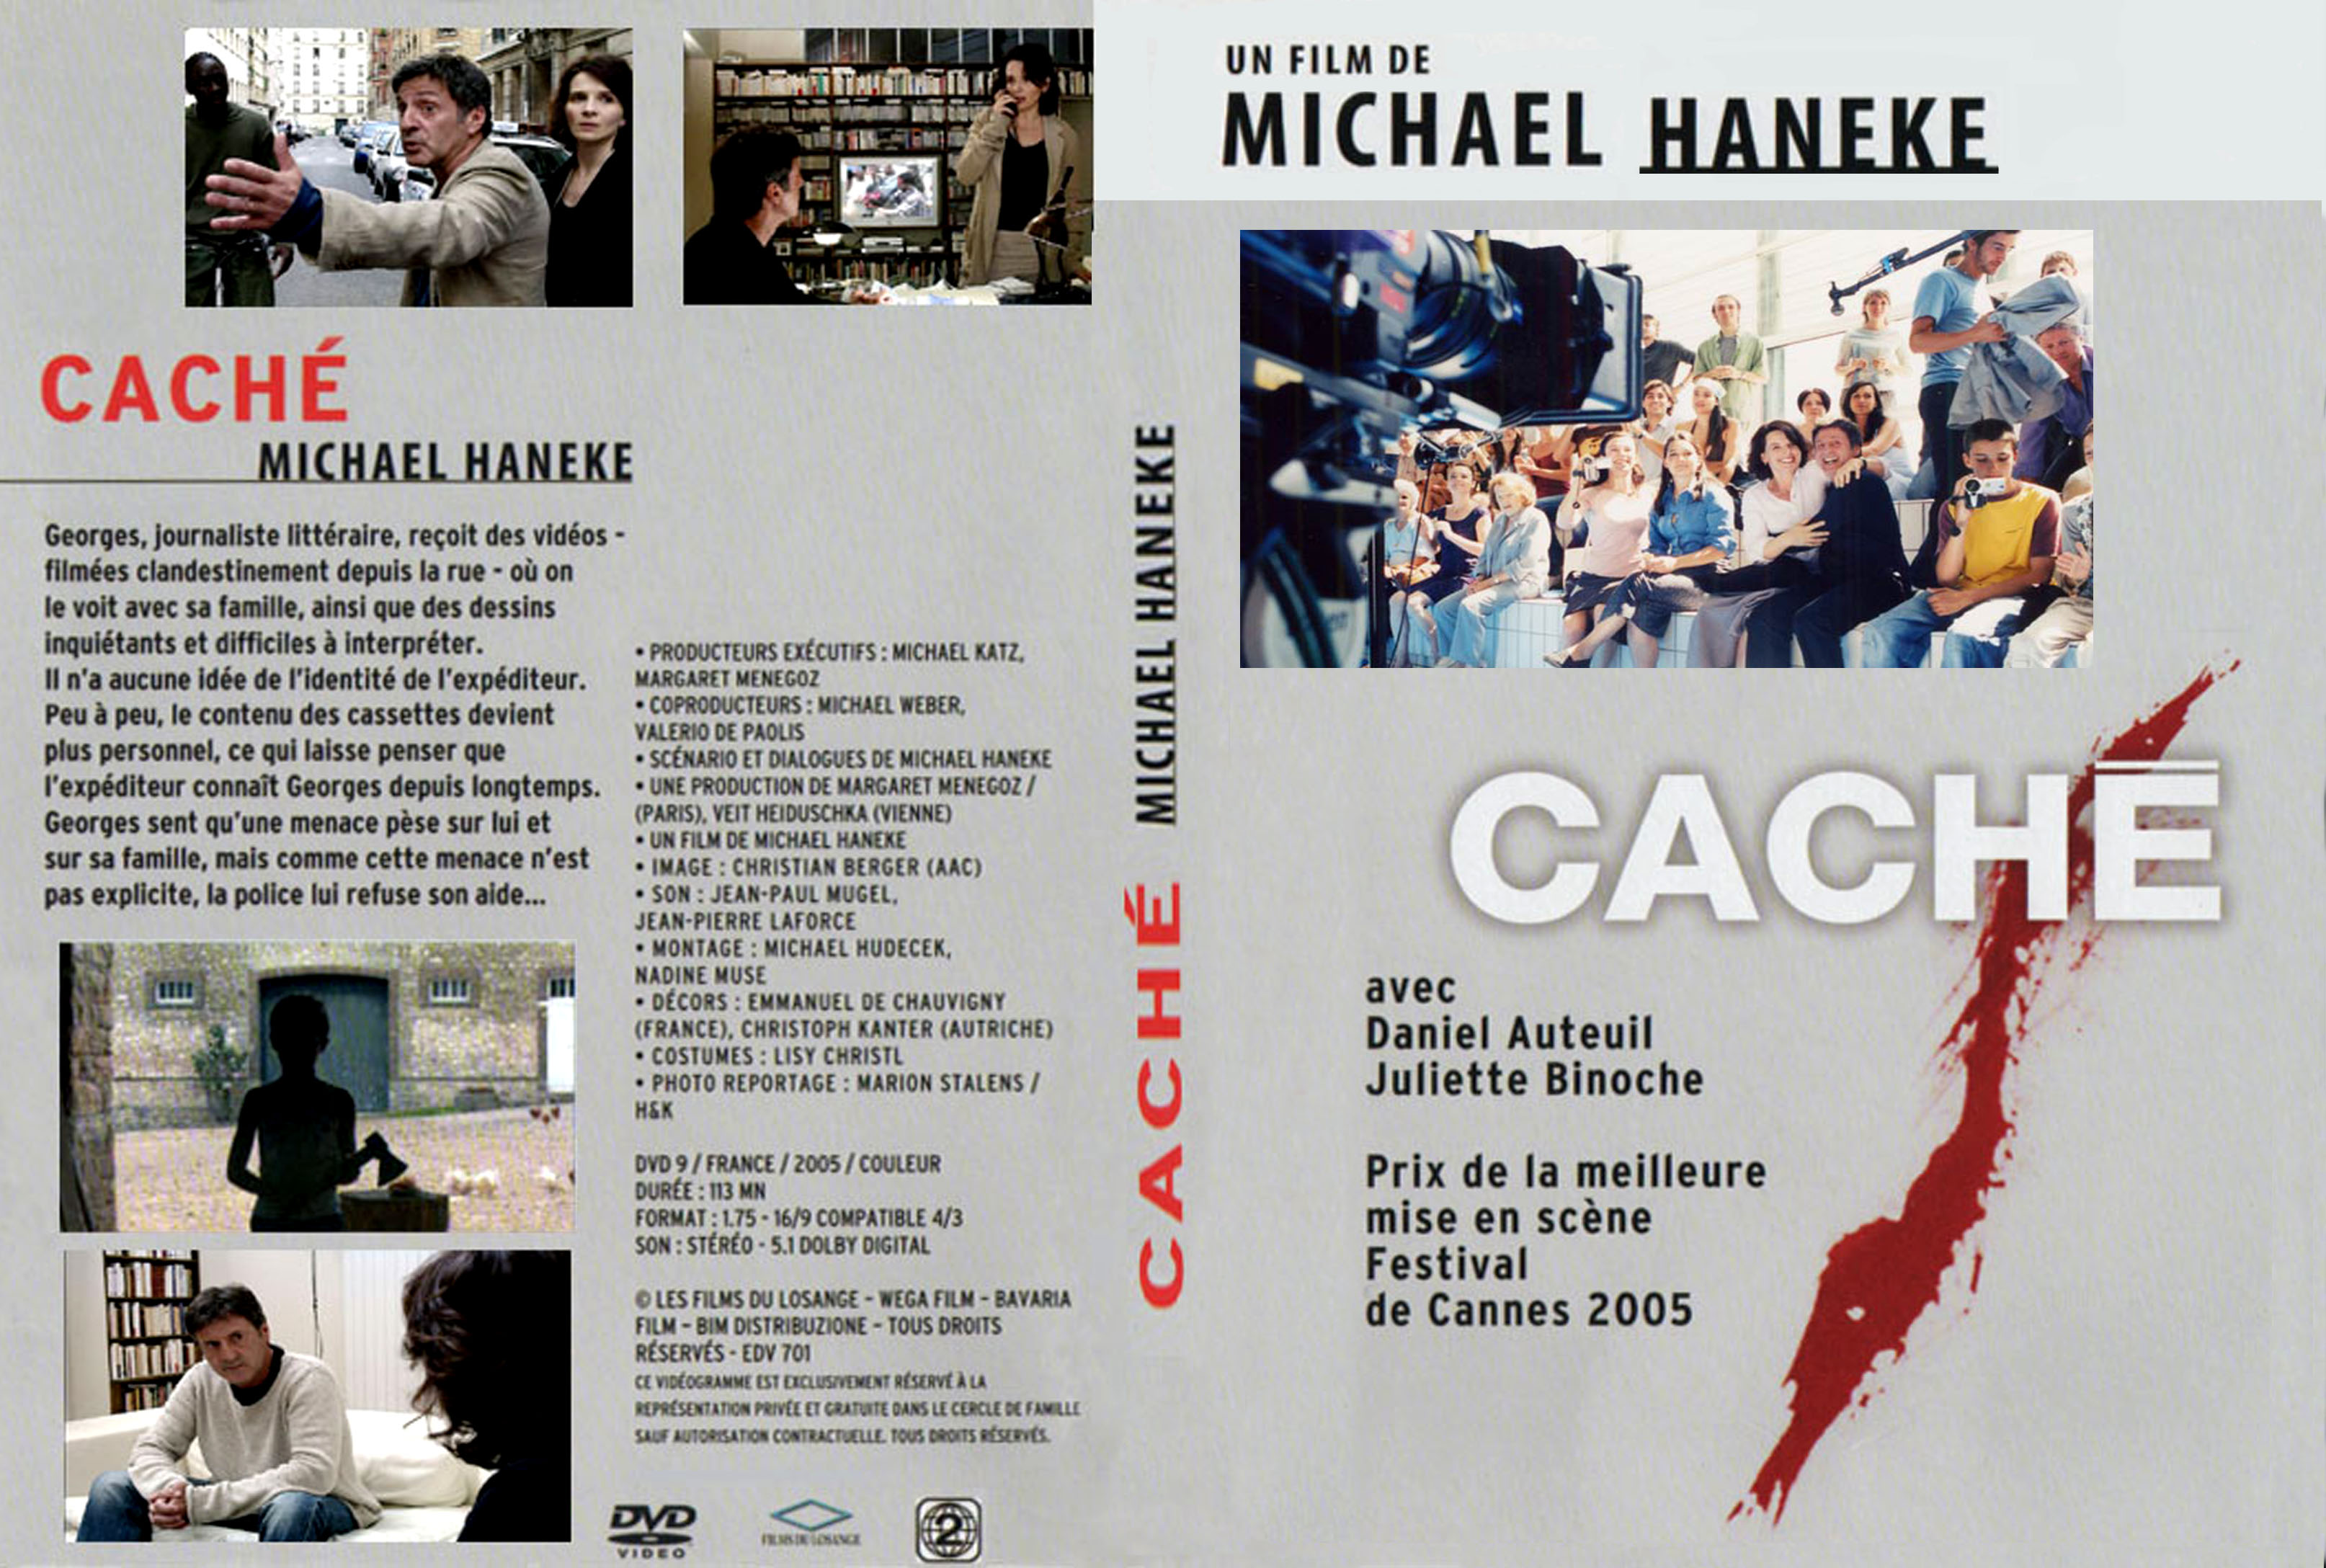 Jaquette DVD Cach   2005  